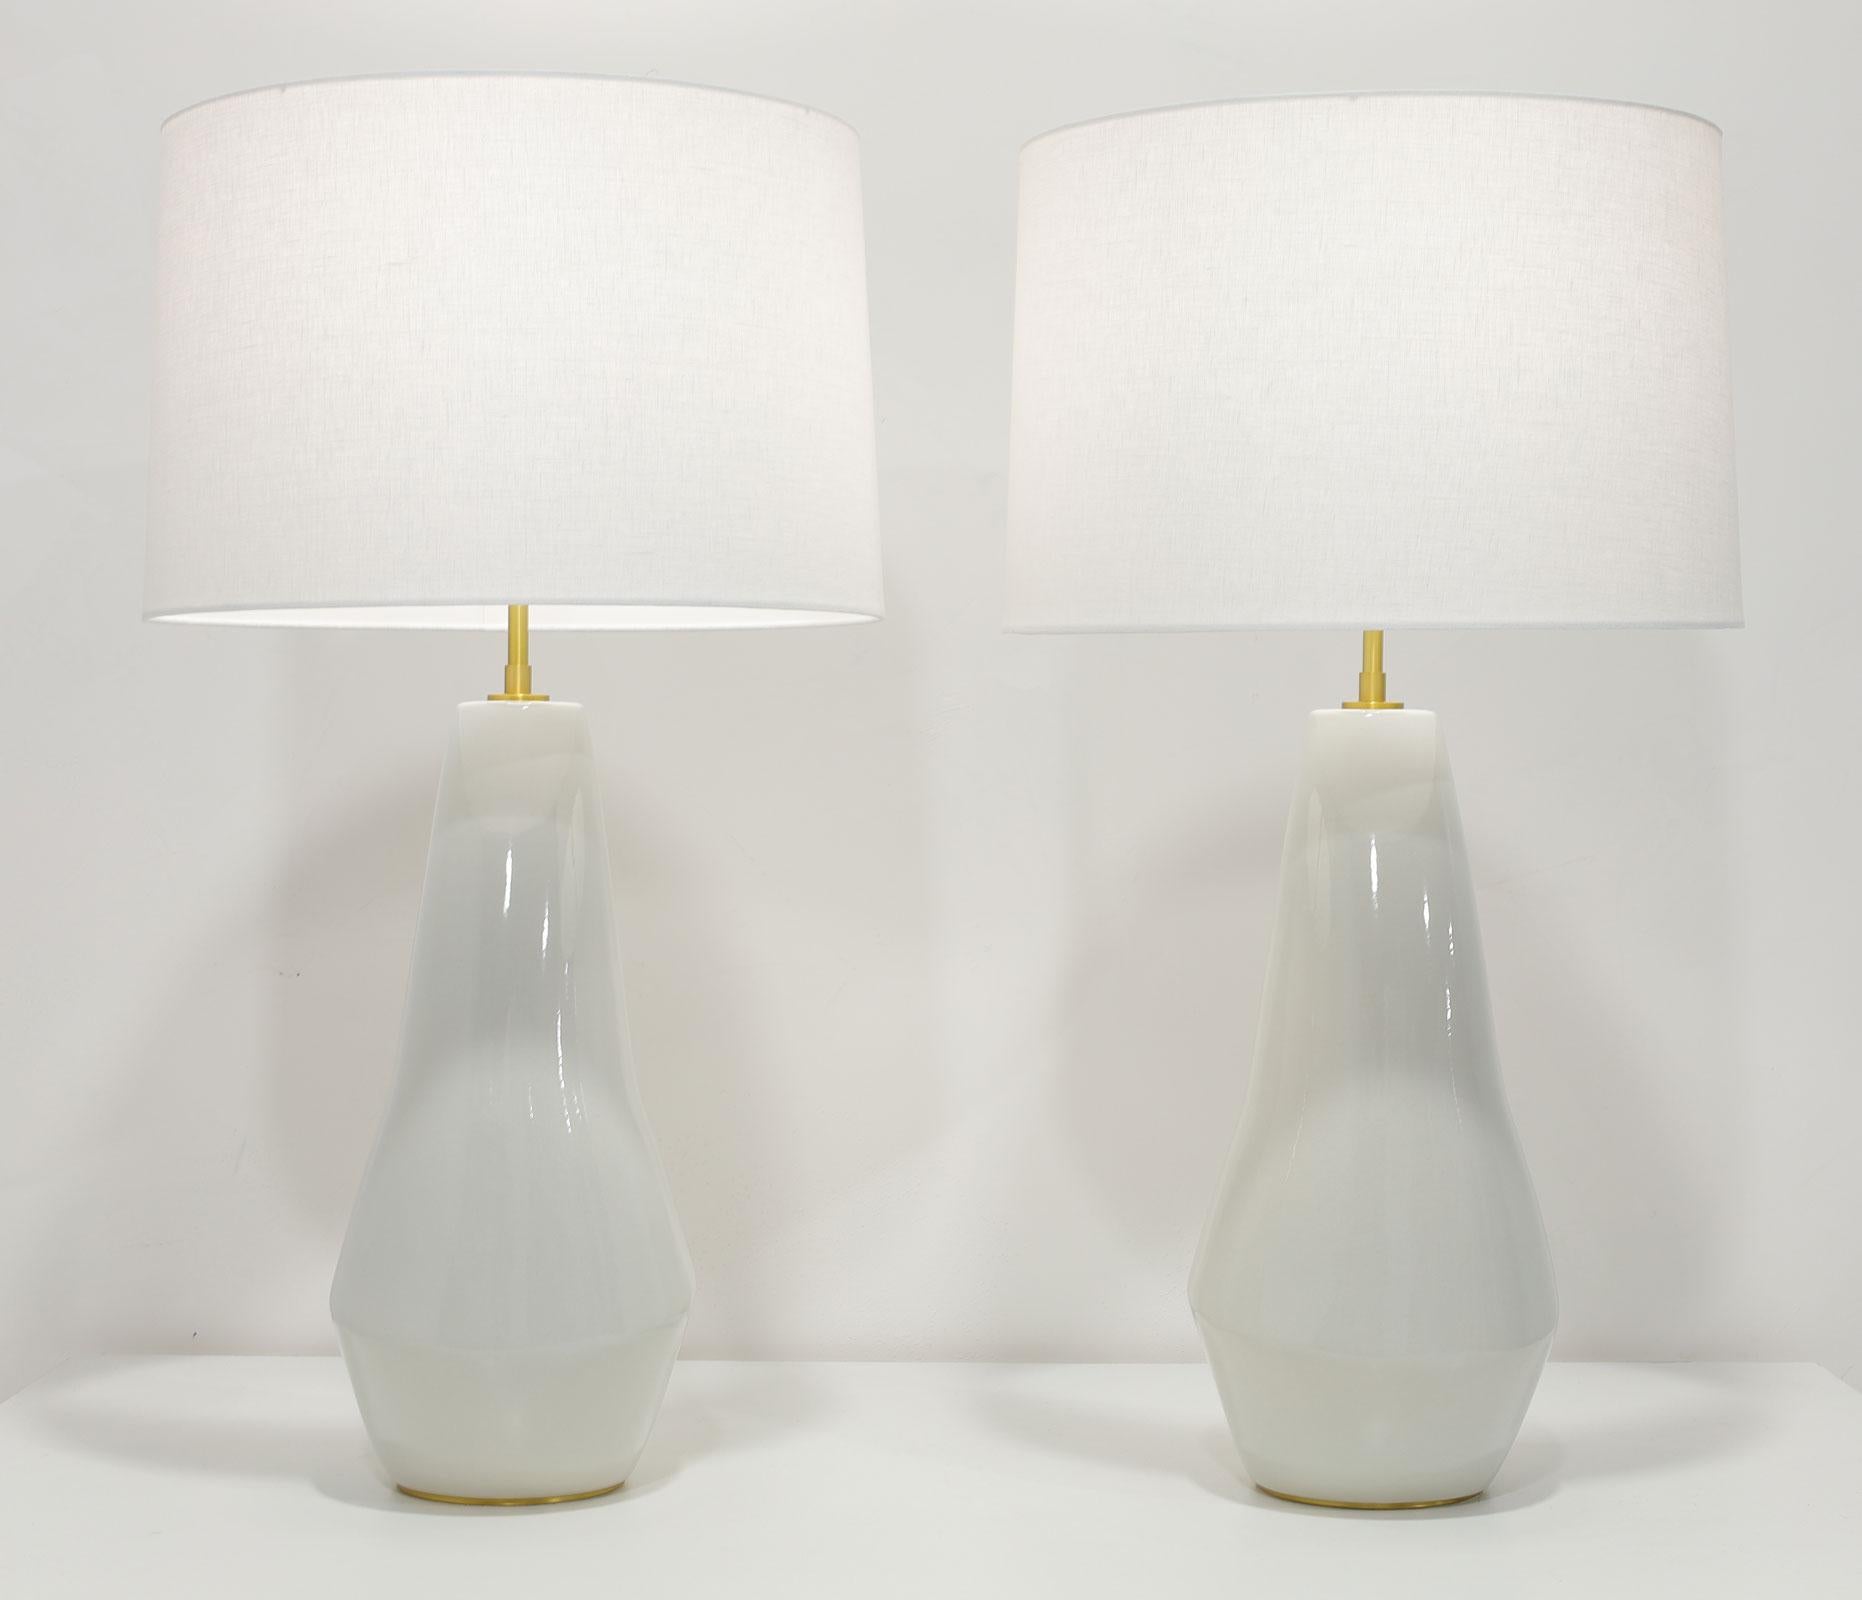 Pair of Contour Artic White Ceramic Table Lamps by Kelly Wearstler For Sale 1